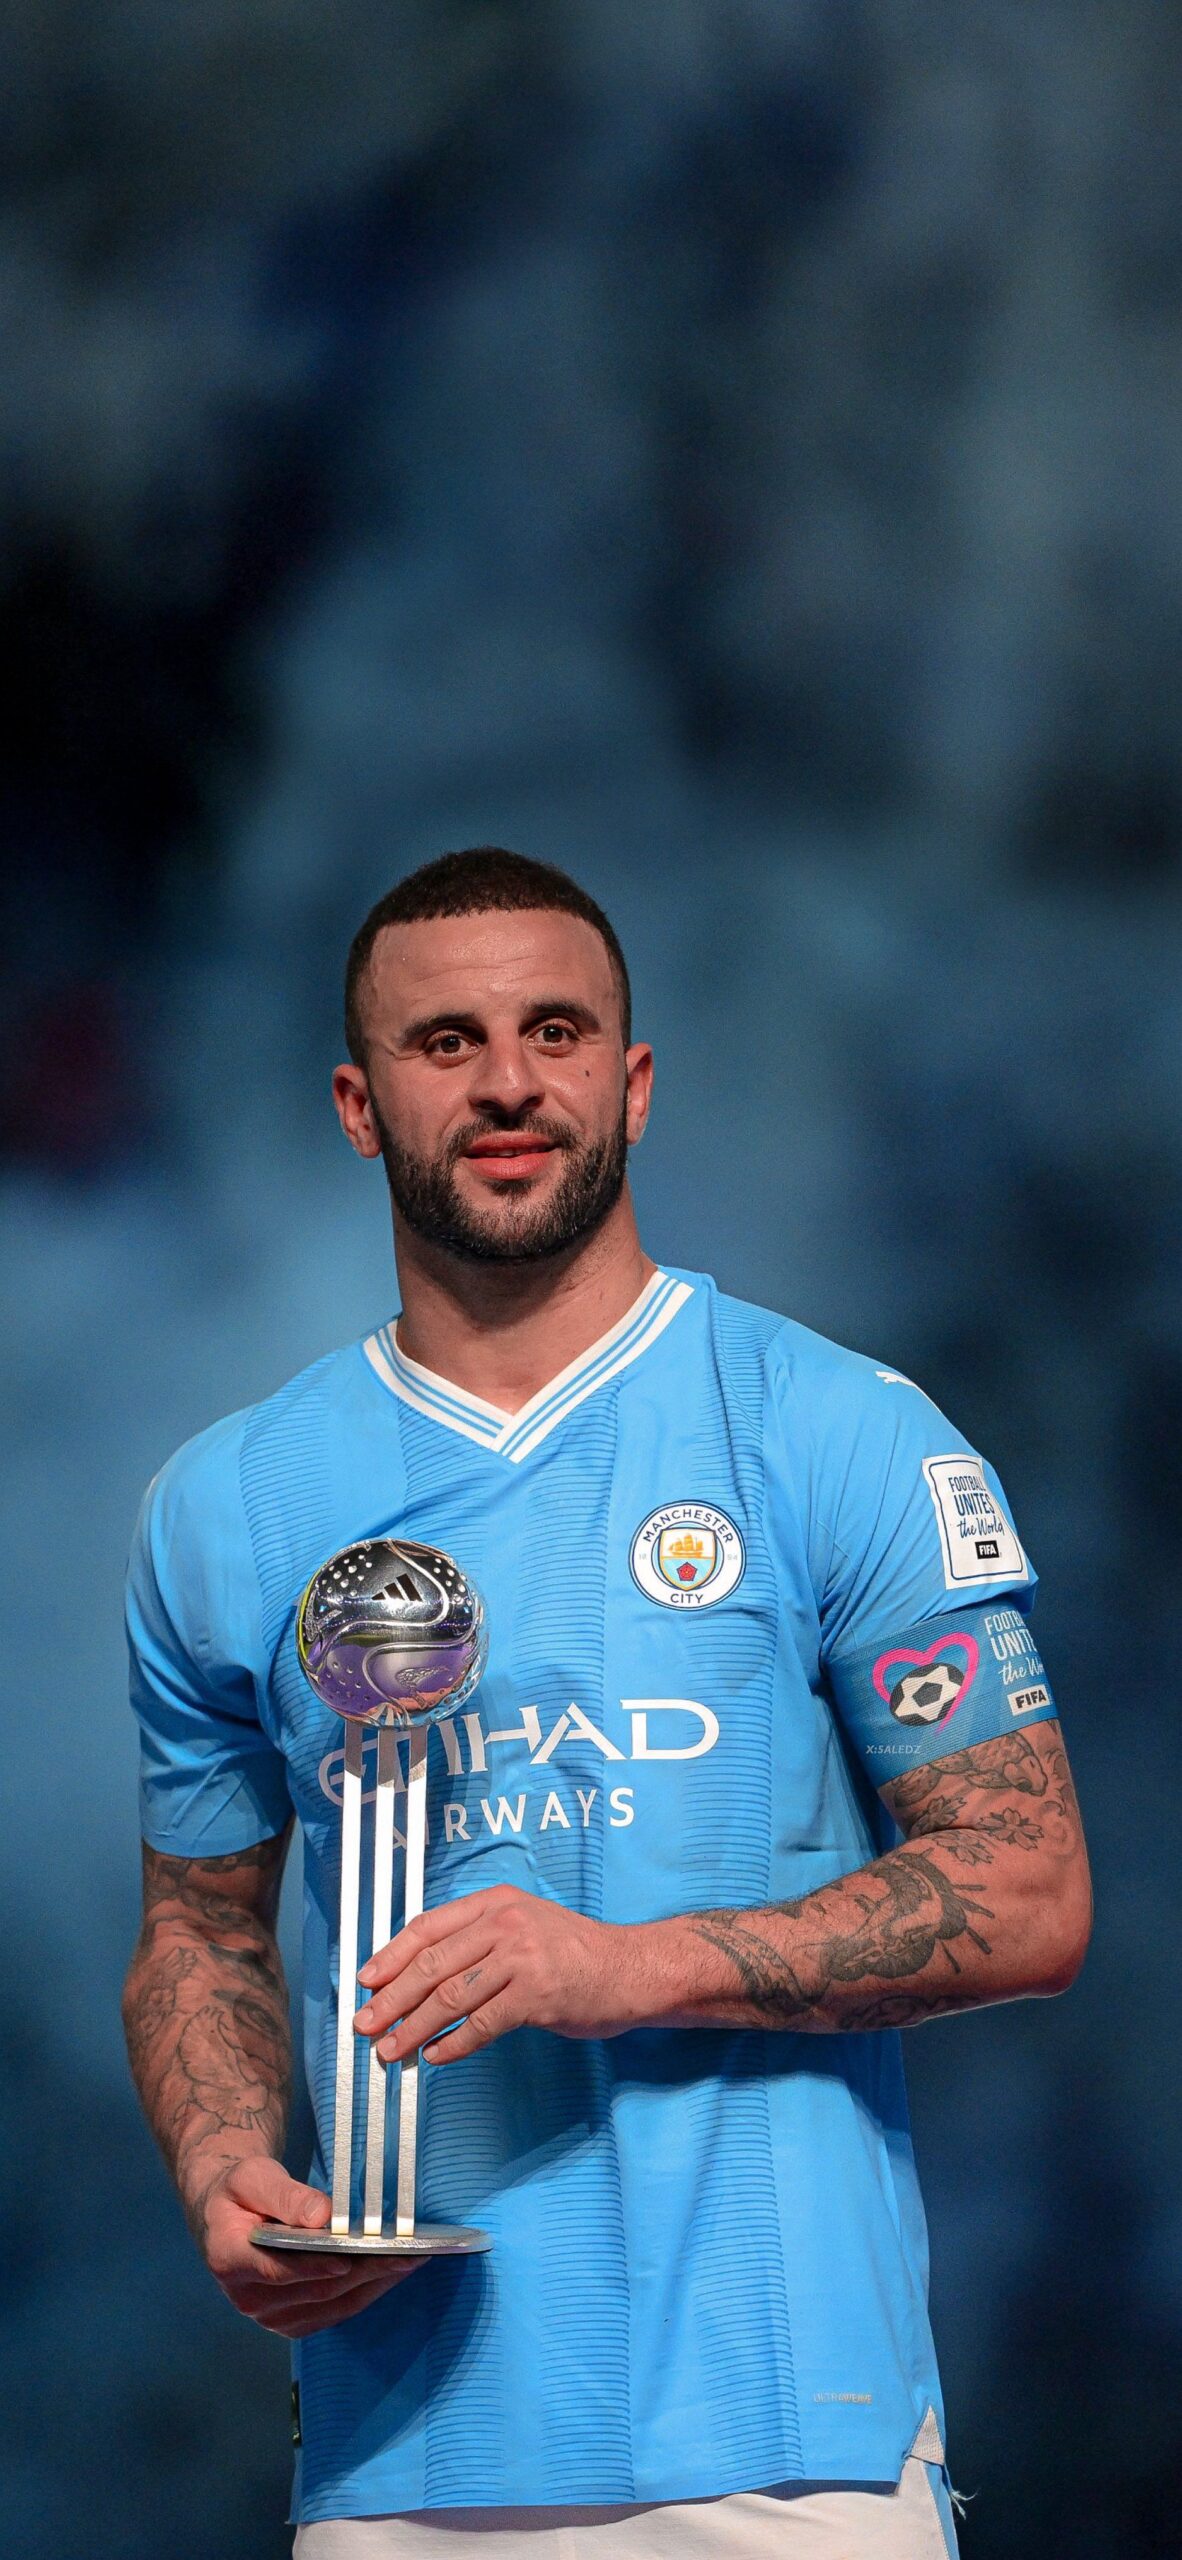 CWC, Kyle, Manchester City, manchester city football club, manchester city wallpapers 4k, Walker, wallpapers iPhone - Kyle Walker wallpapers 4k Manchester city FC